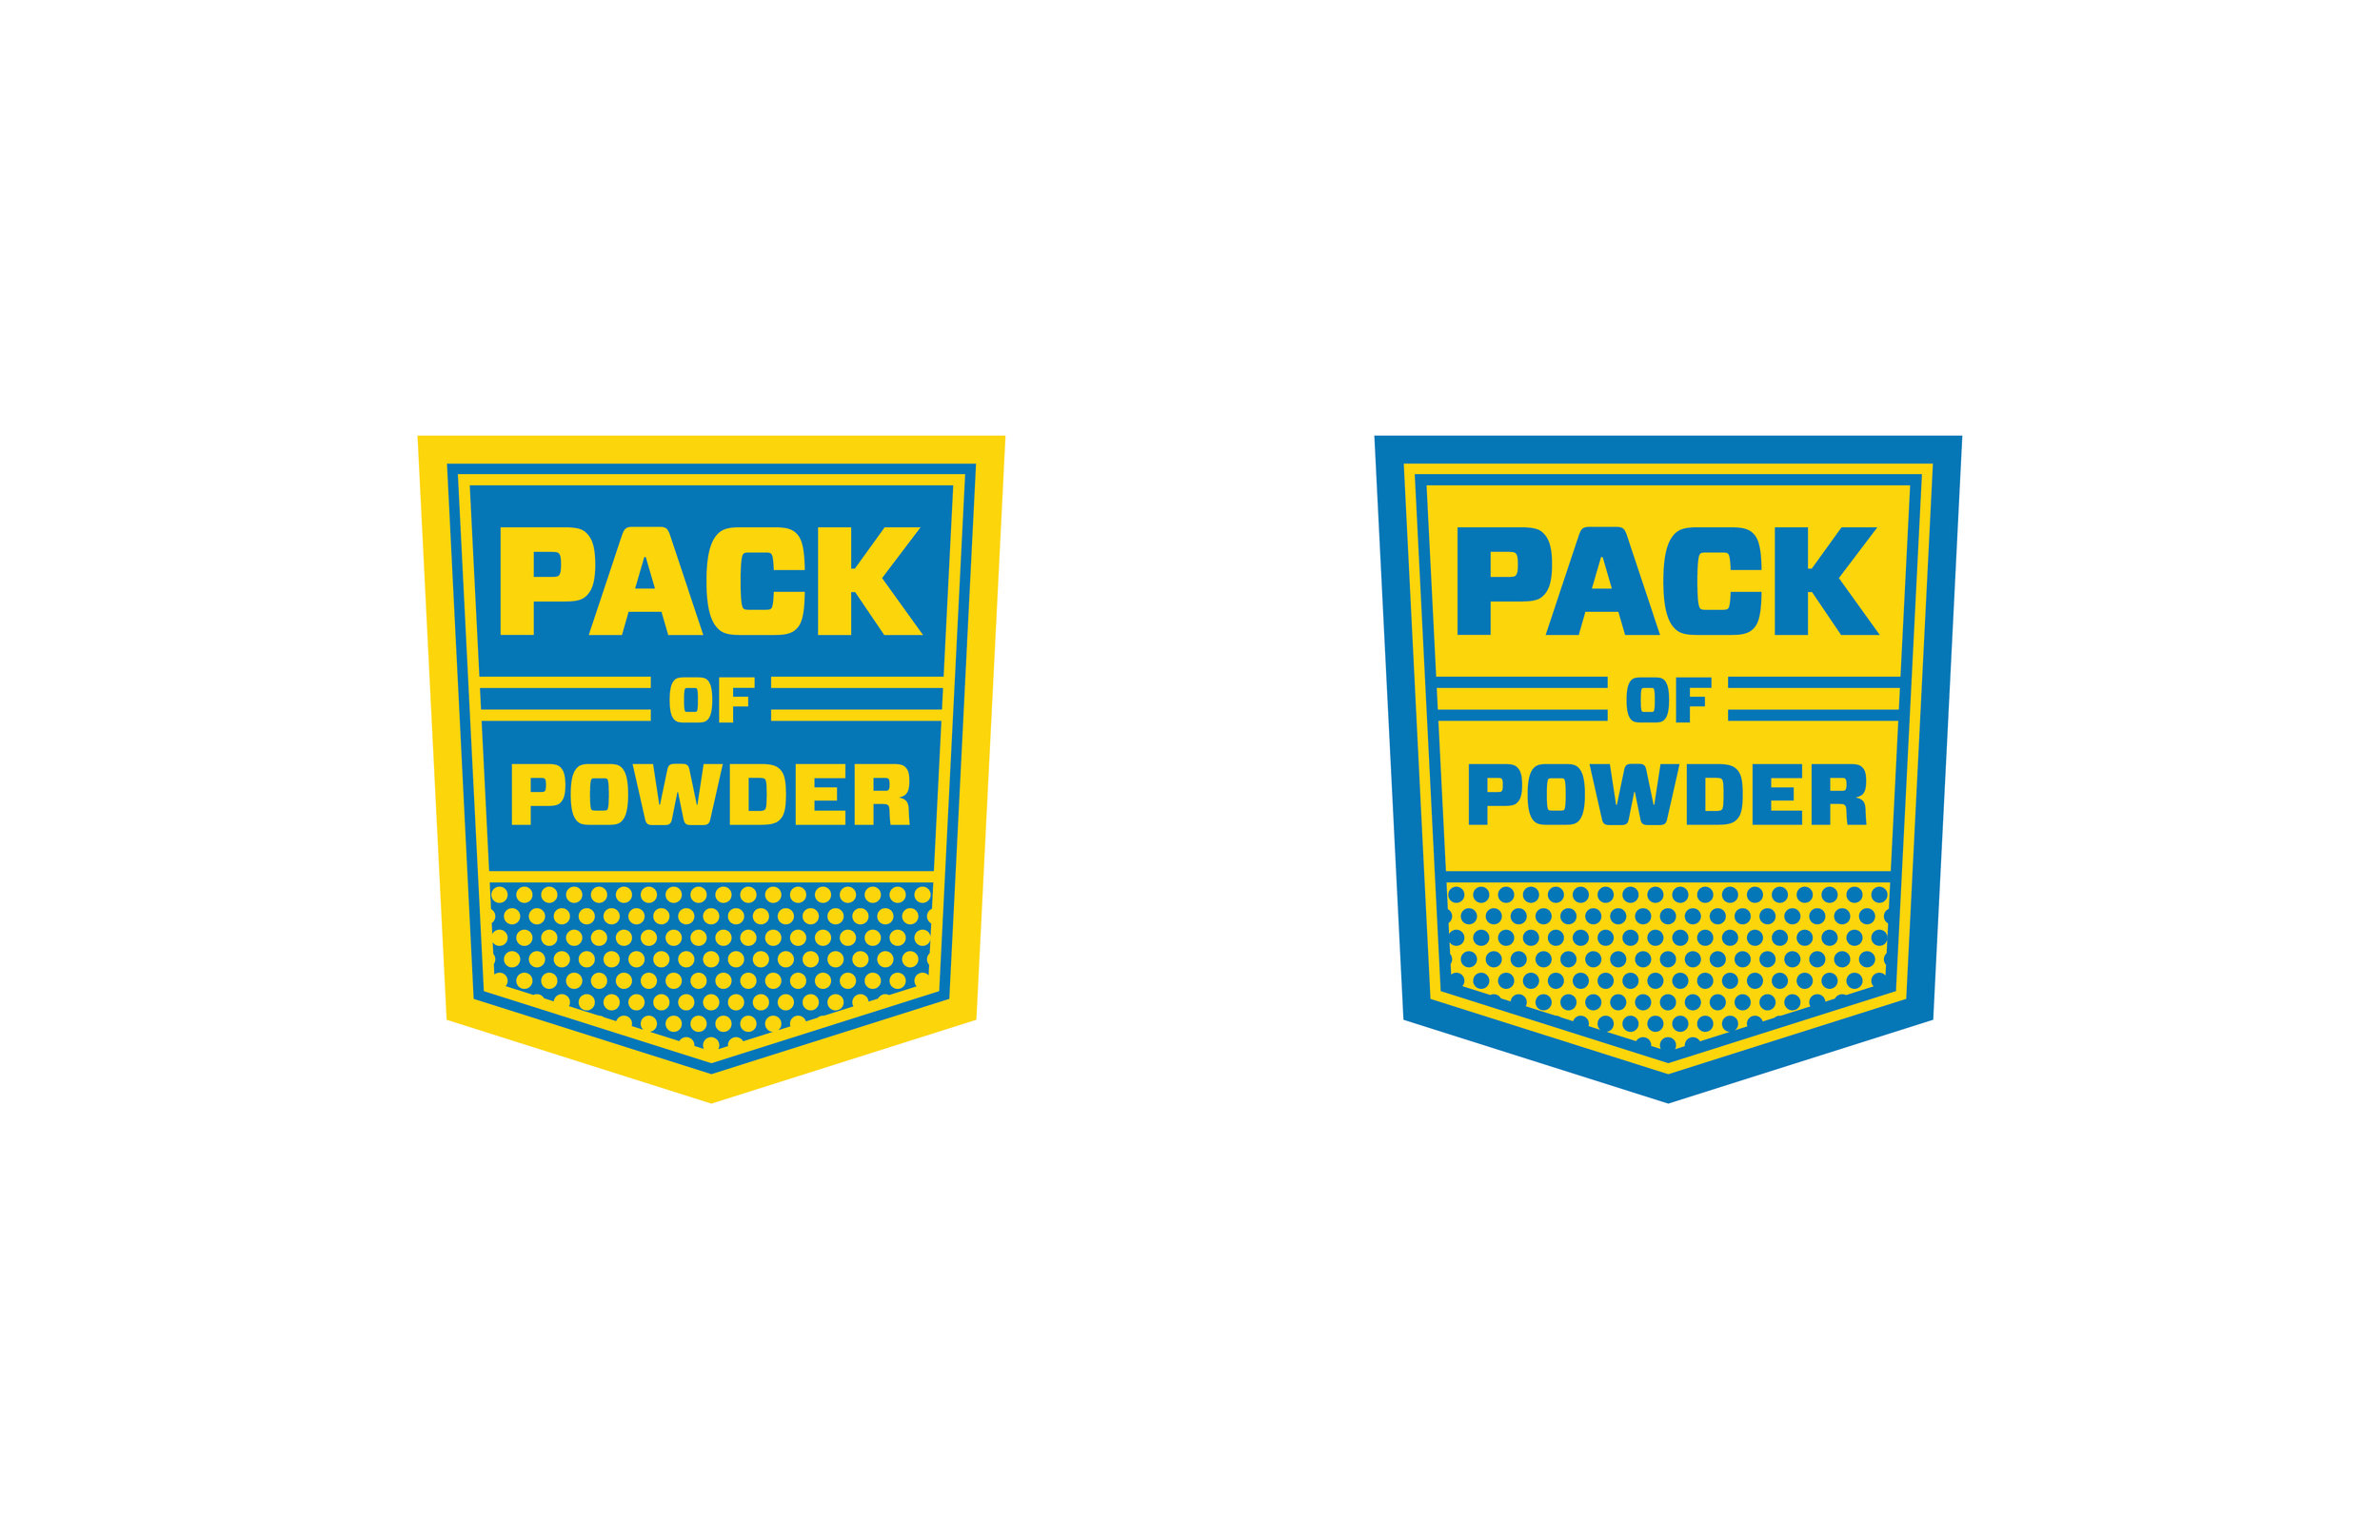 Pack of Powder (Copy)